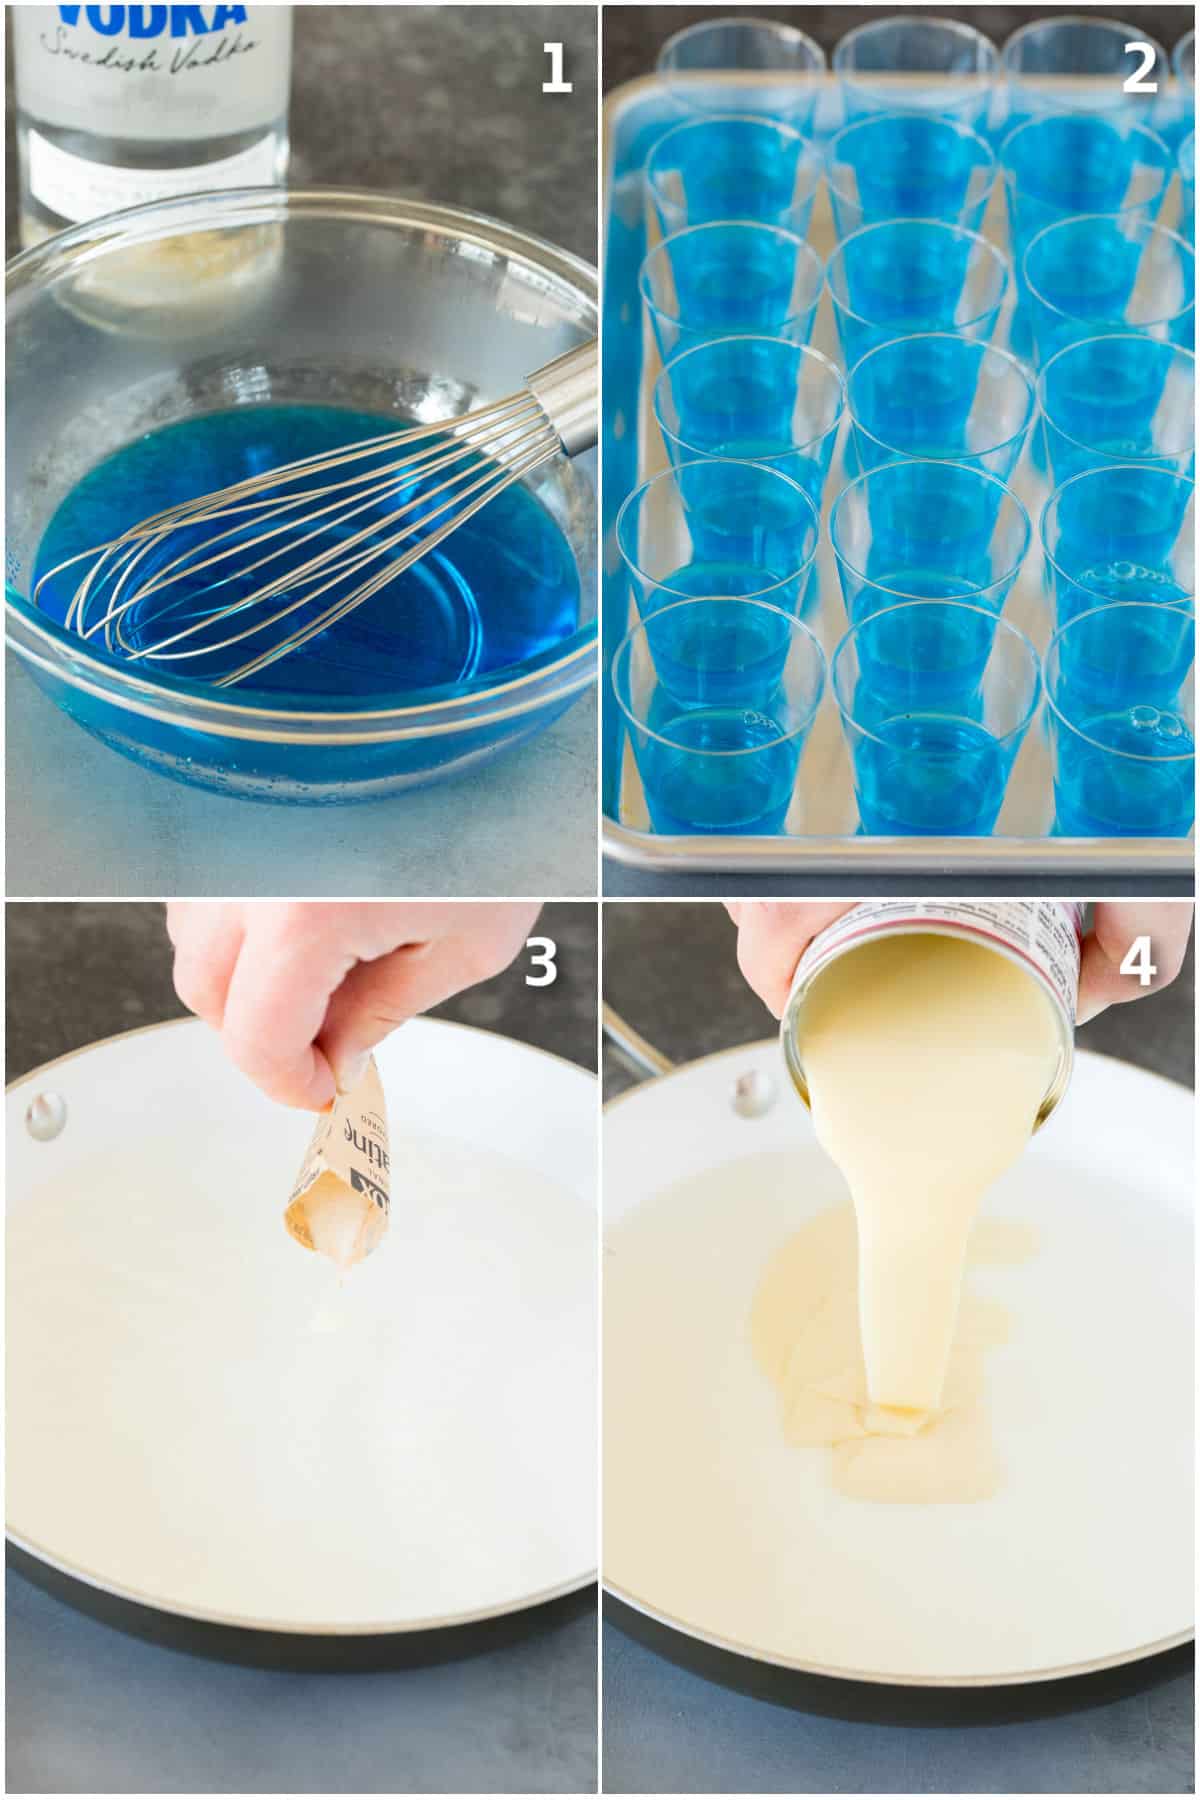 Blue jello being made and gelatin combined with condensed milk.